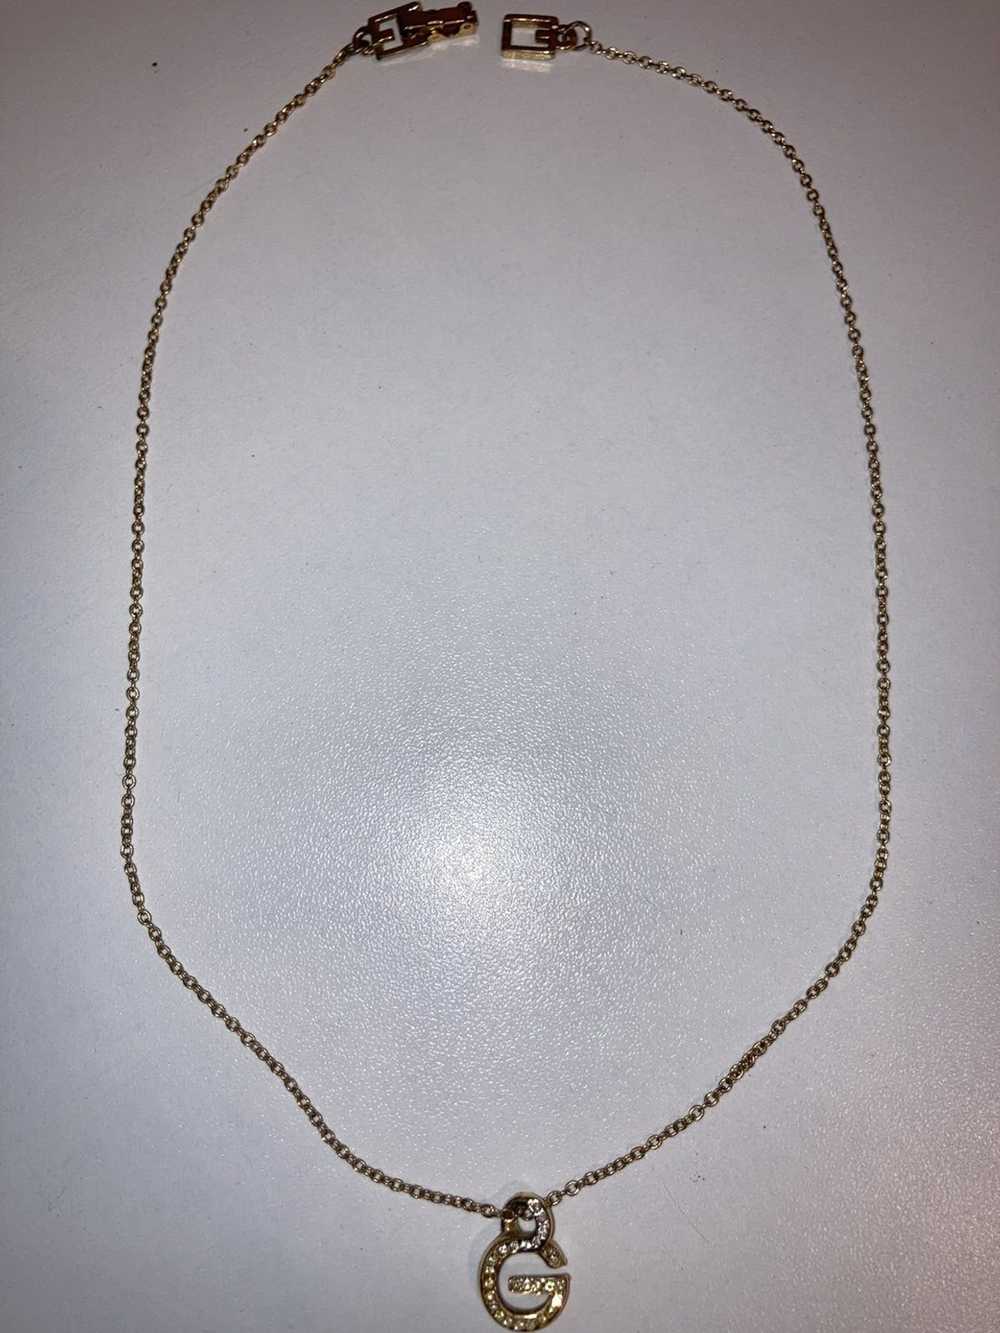 Givenchy Gold Givenchy Pendant Necklace - image 4